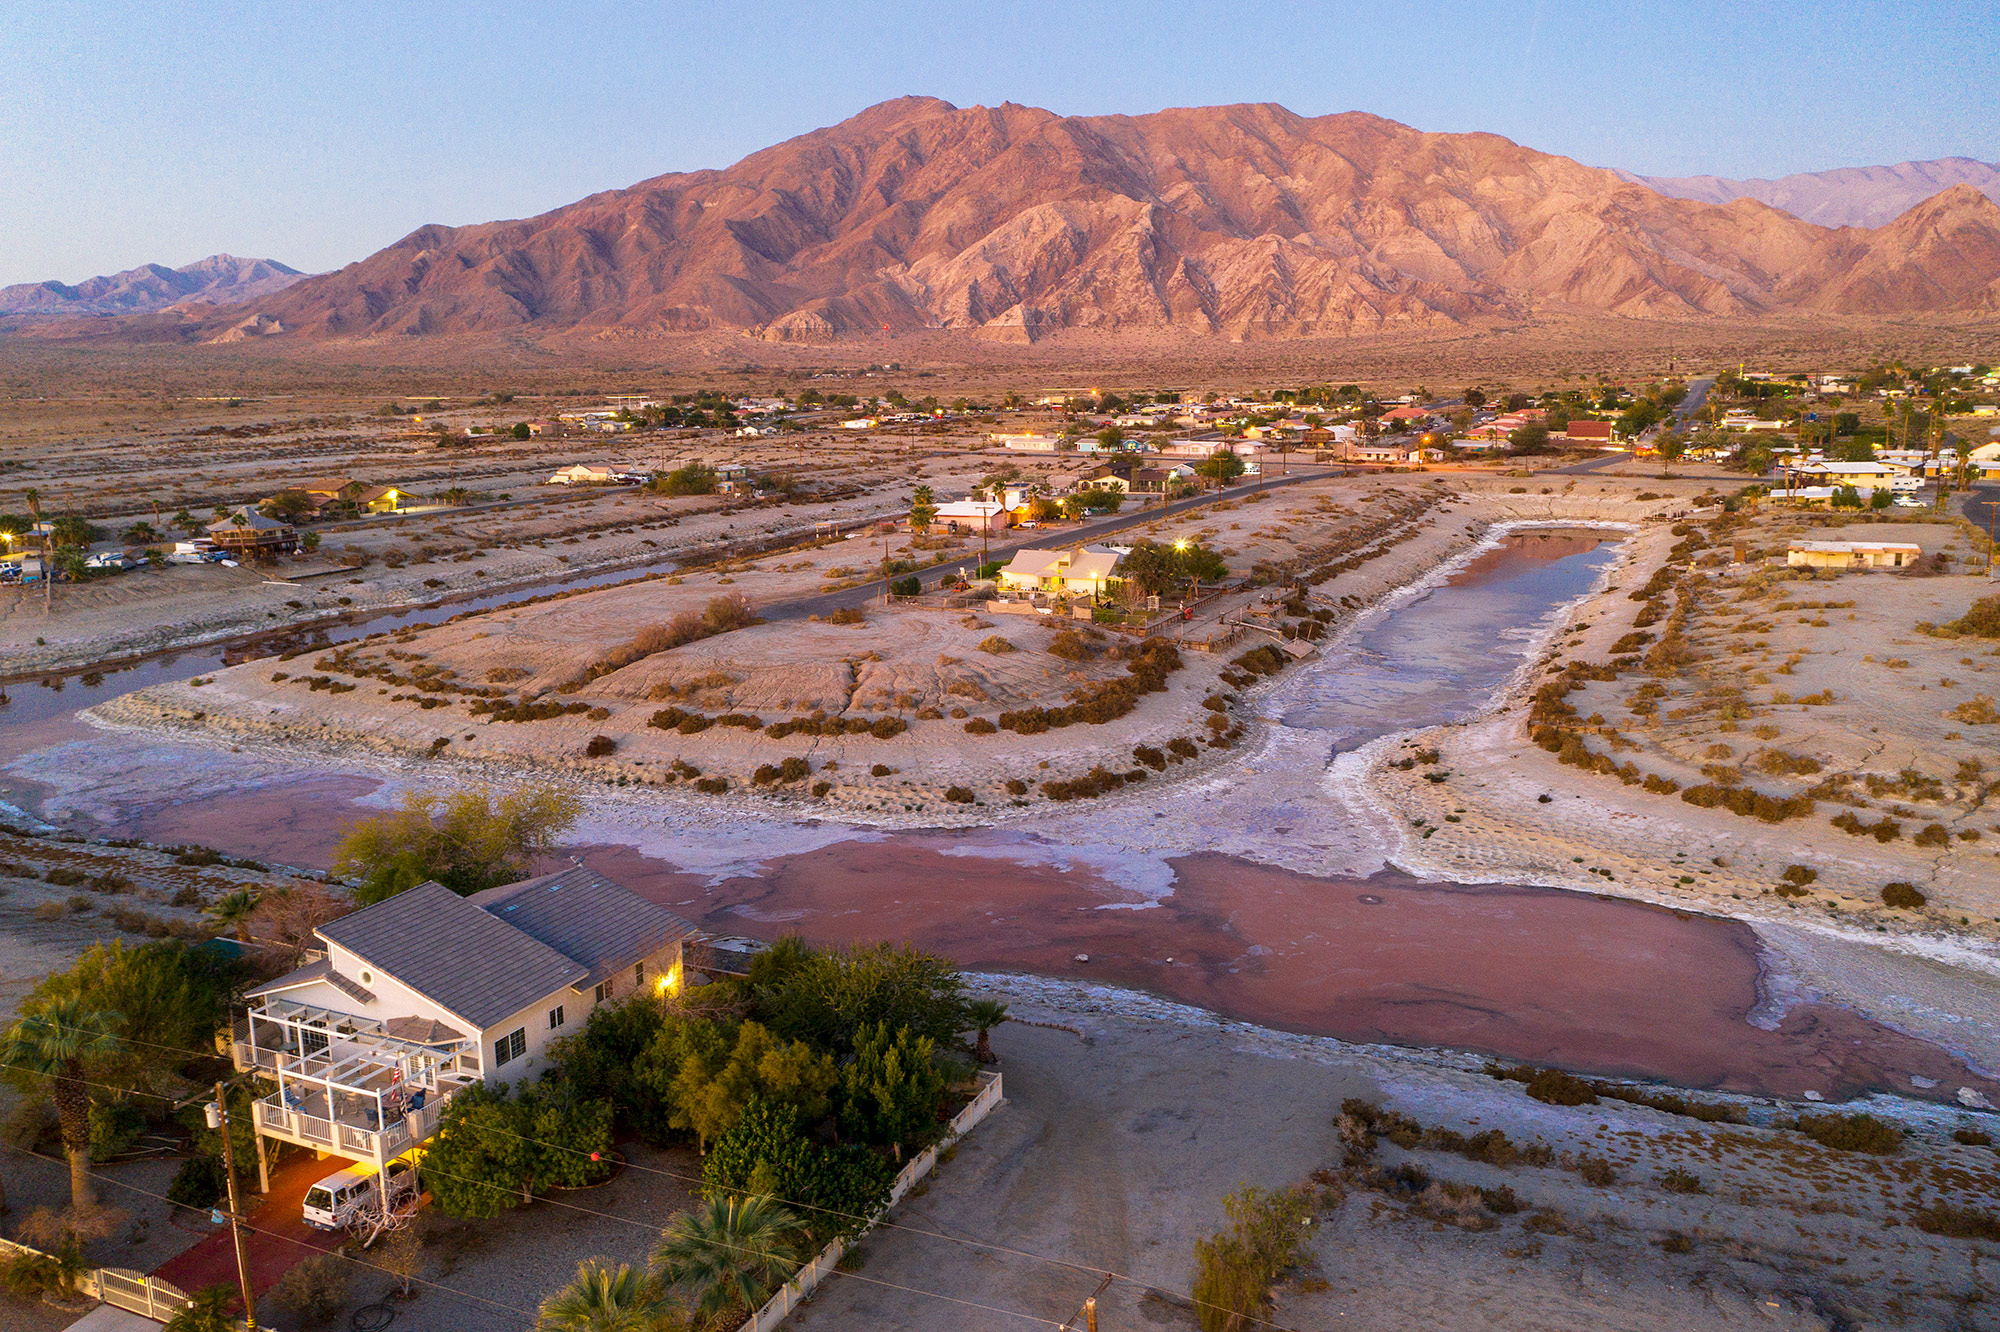 An overhead view of marinas that have become landlocked as the Salton Sea evaporates